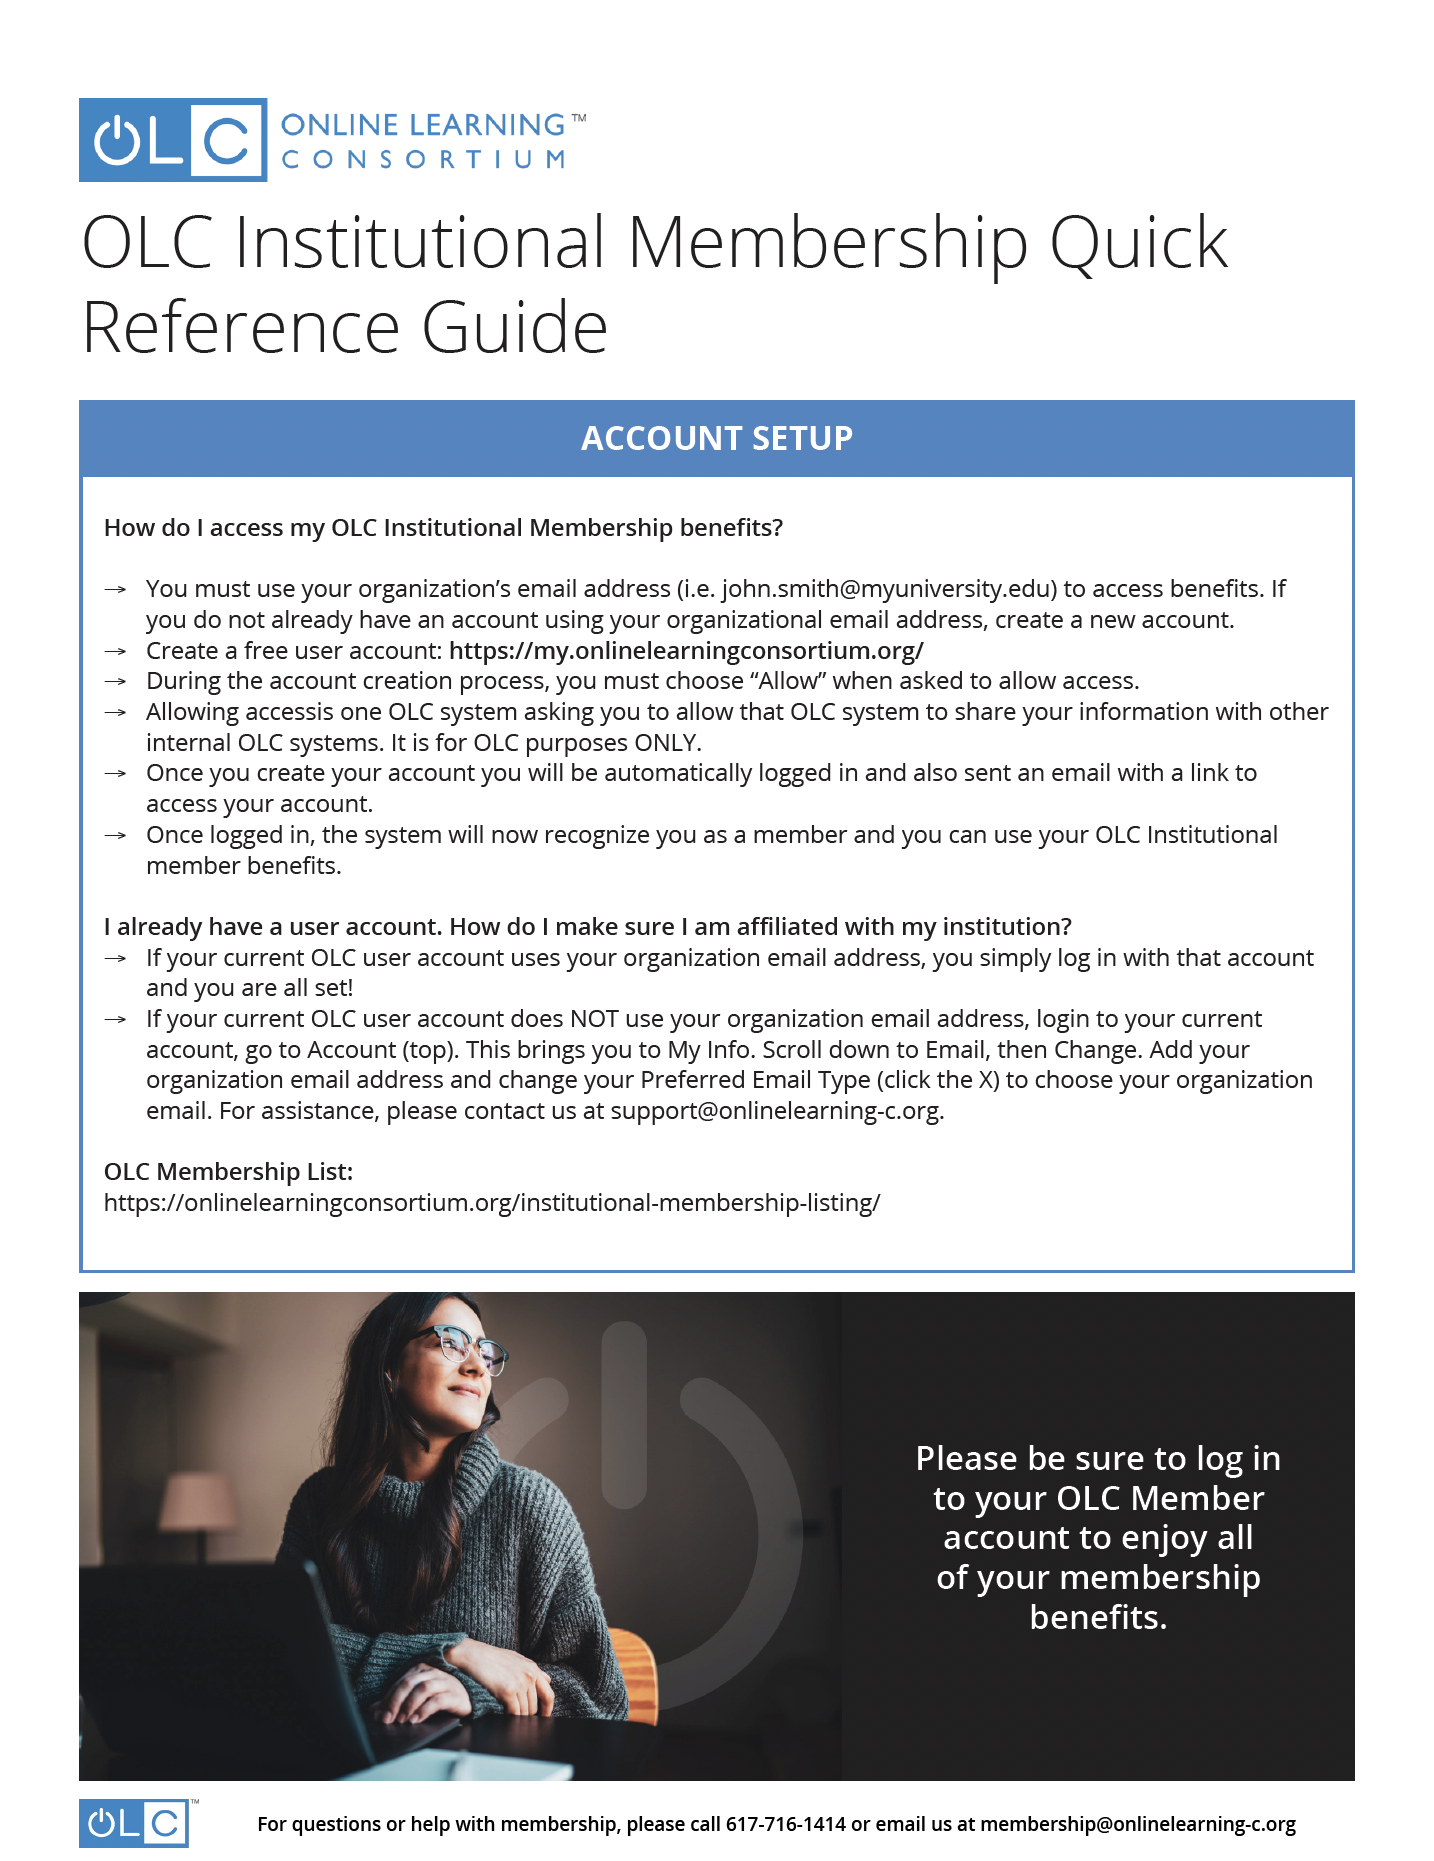 OLC Institutional Membership Quick Reference Guide Page 2